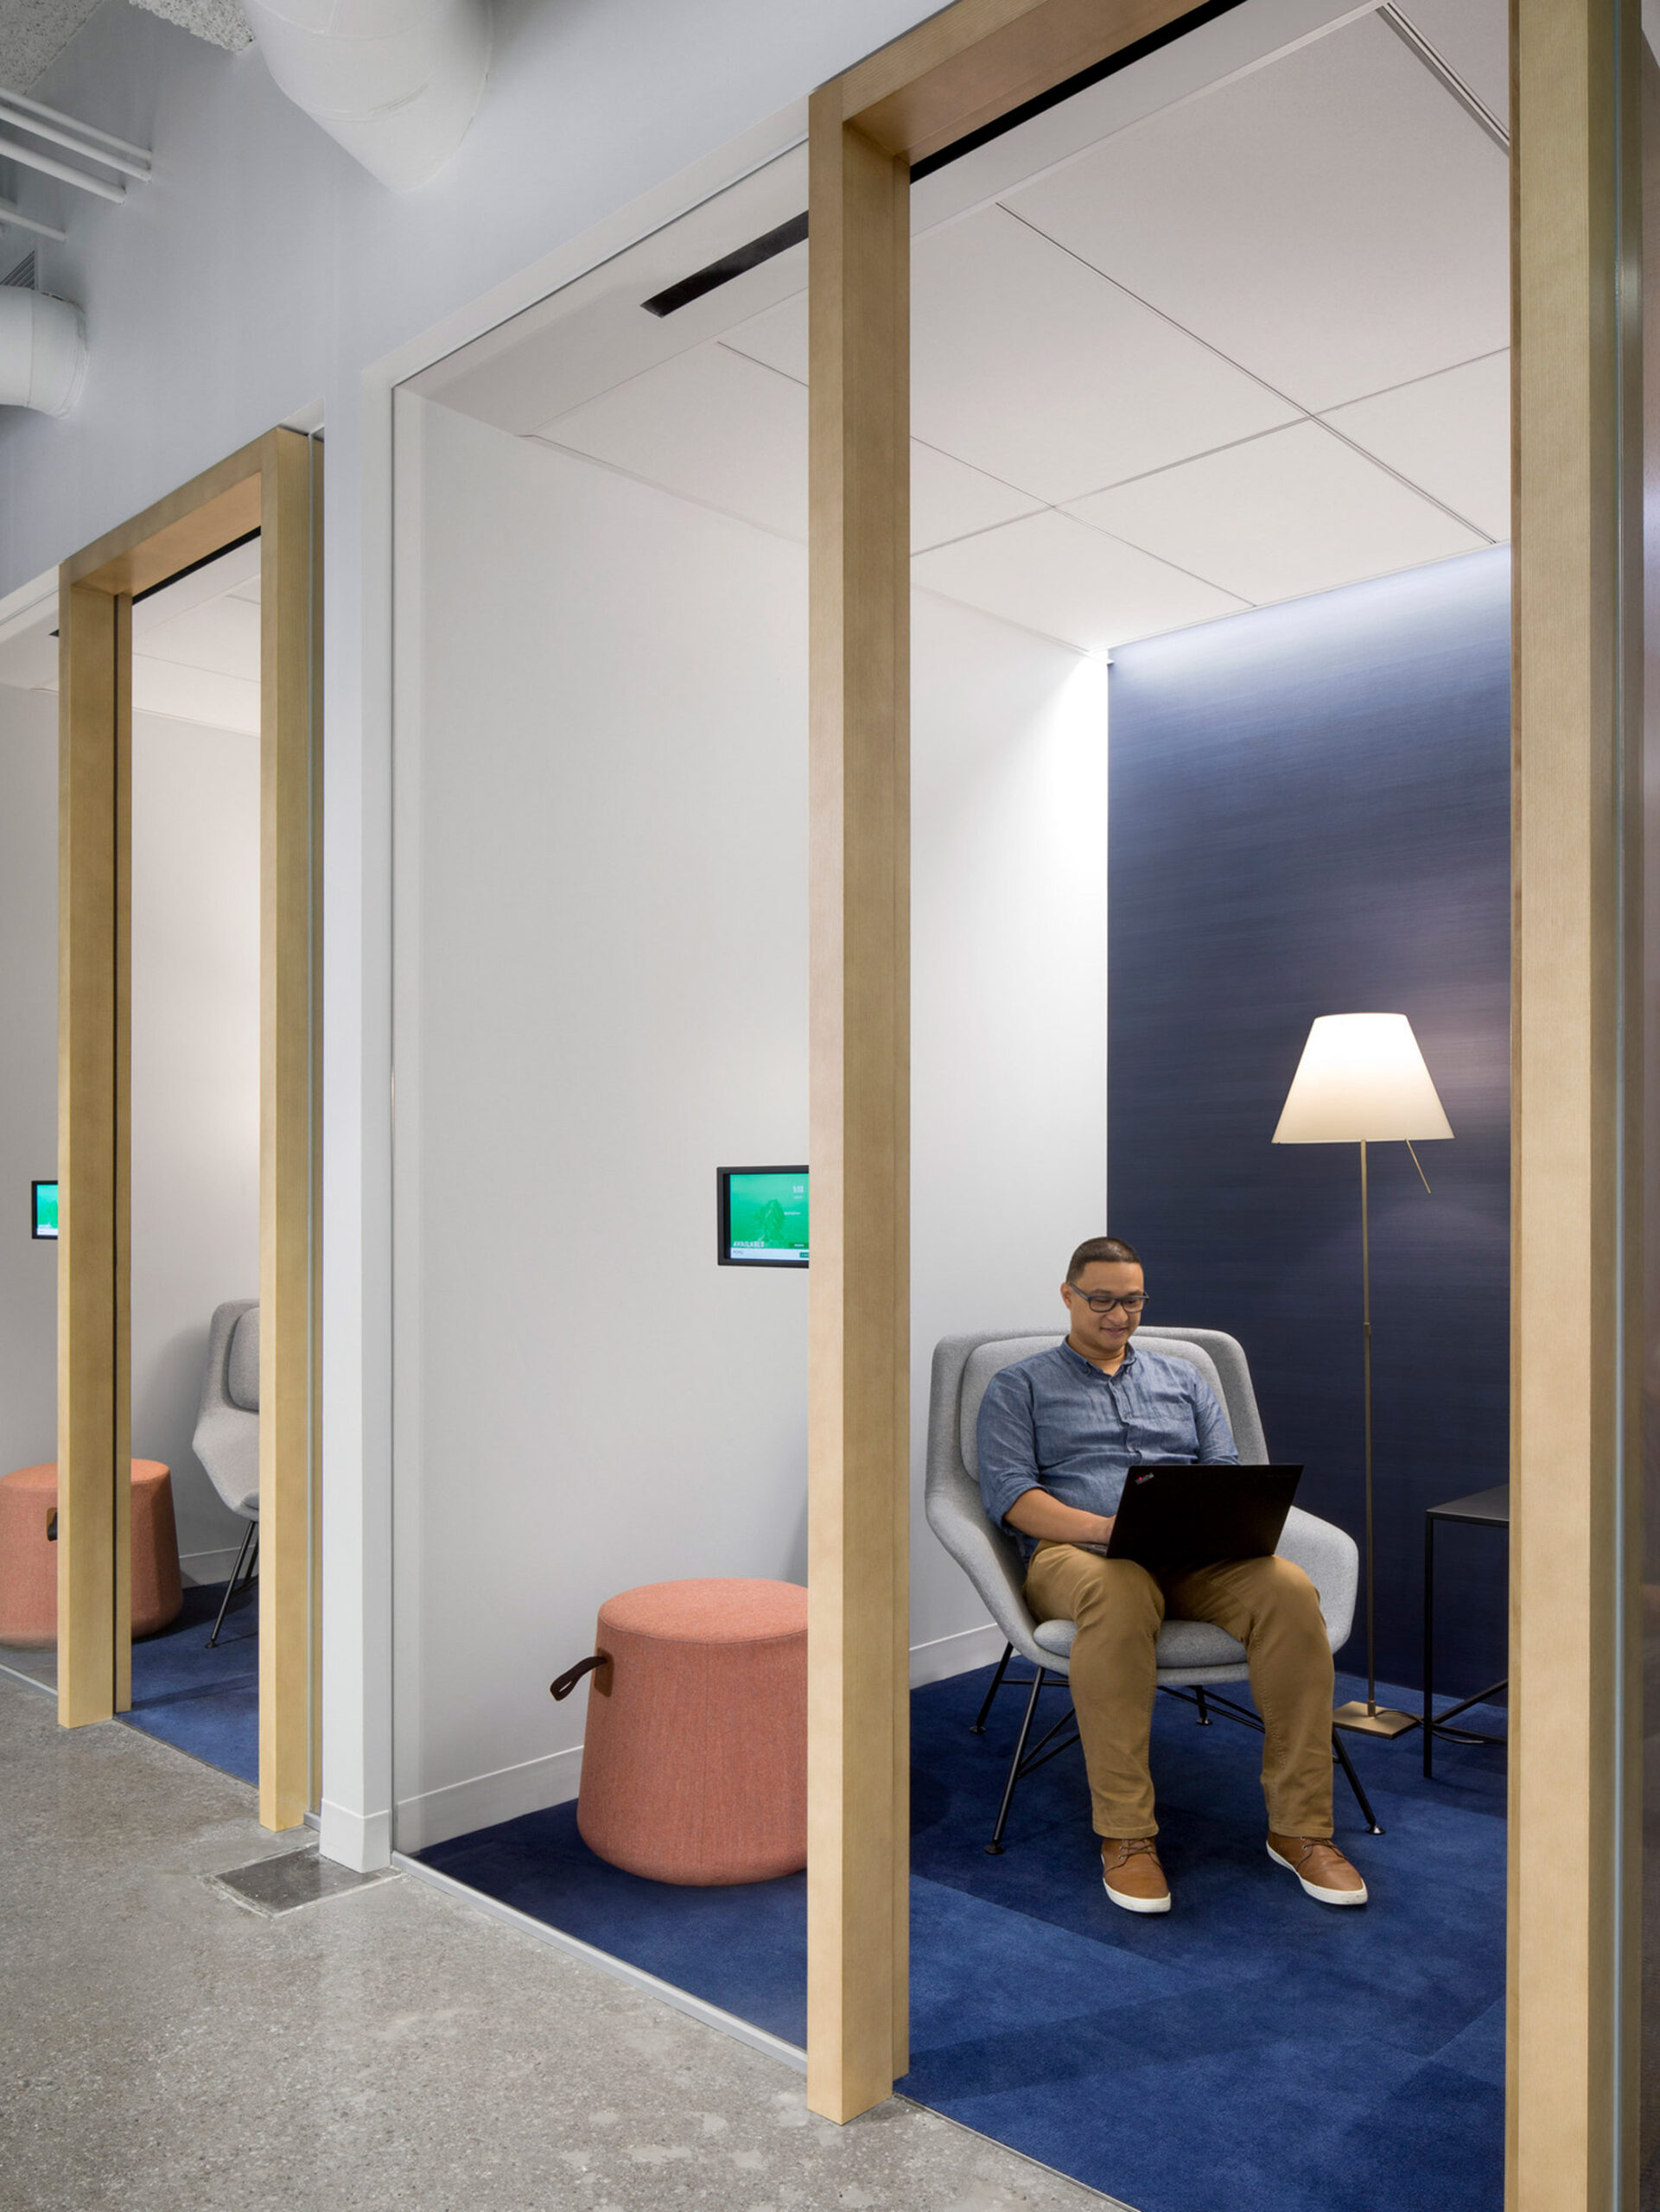 Modern office breakout space featuring glass doors, deep blue acoustic panels, and neutral-toned furniture. A person works on a laptop, seated on a coral ottoman, under a warm floor lamp, highlighting functional yet stylish workplace design.